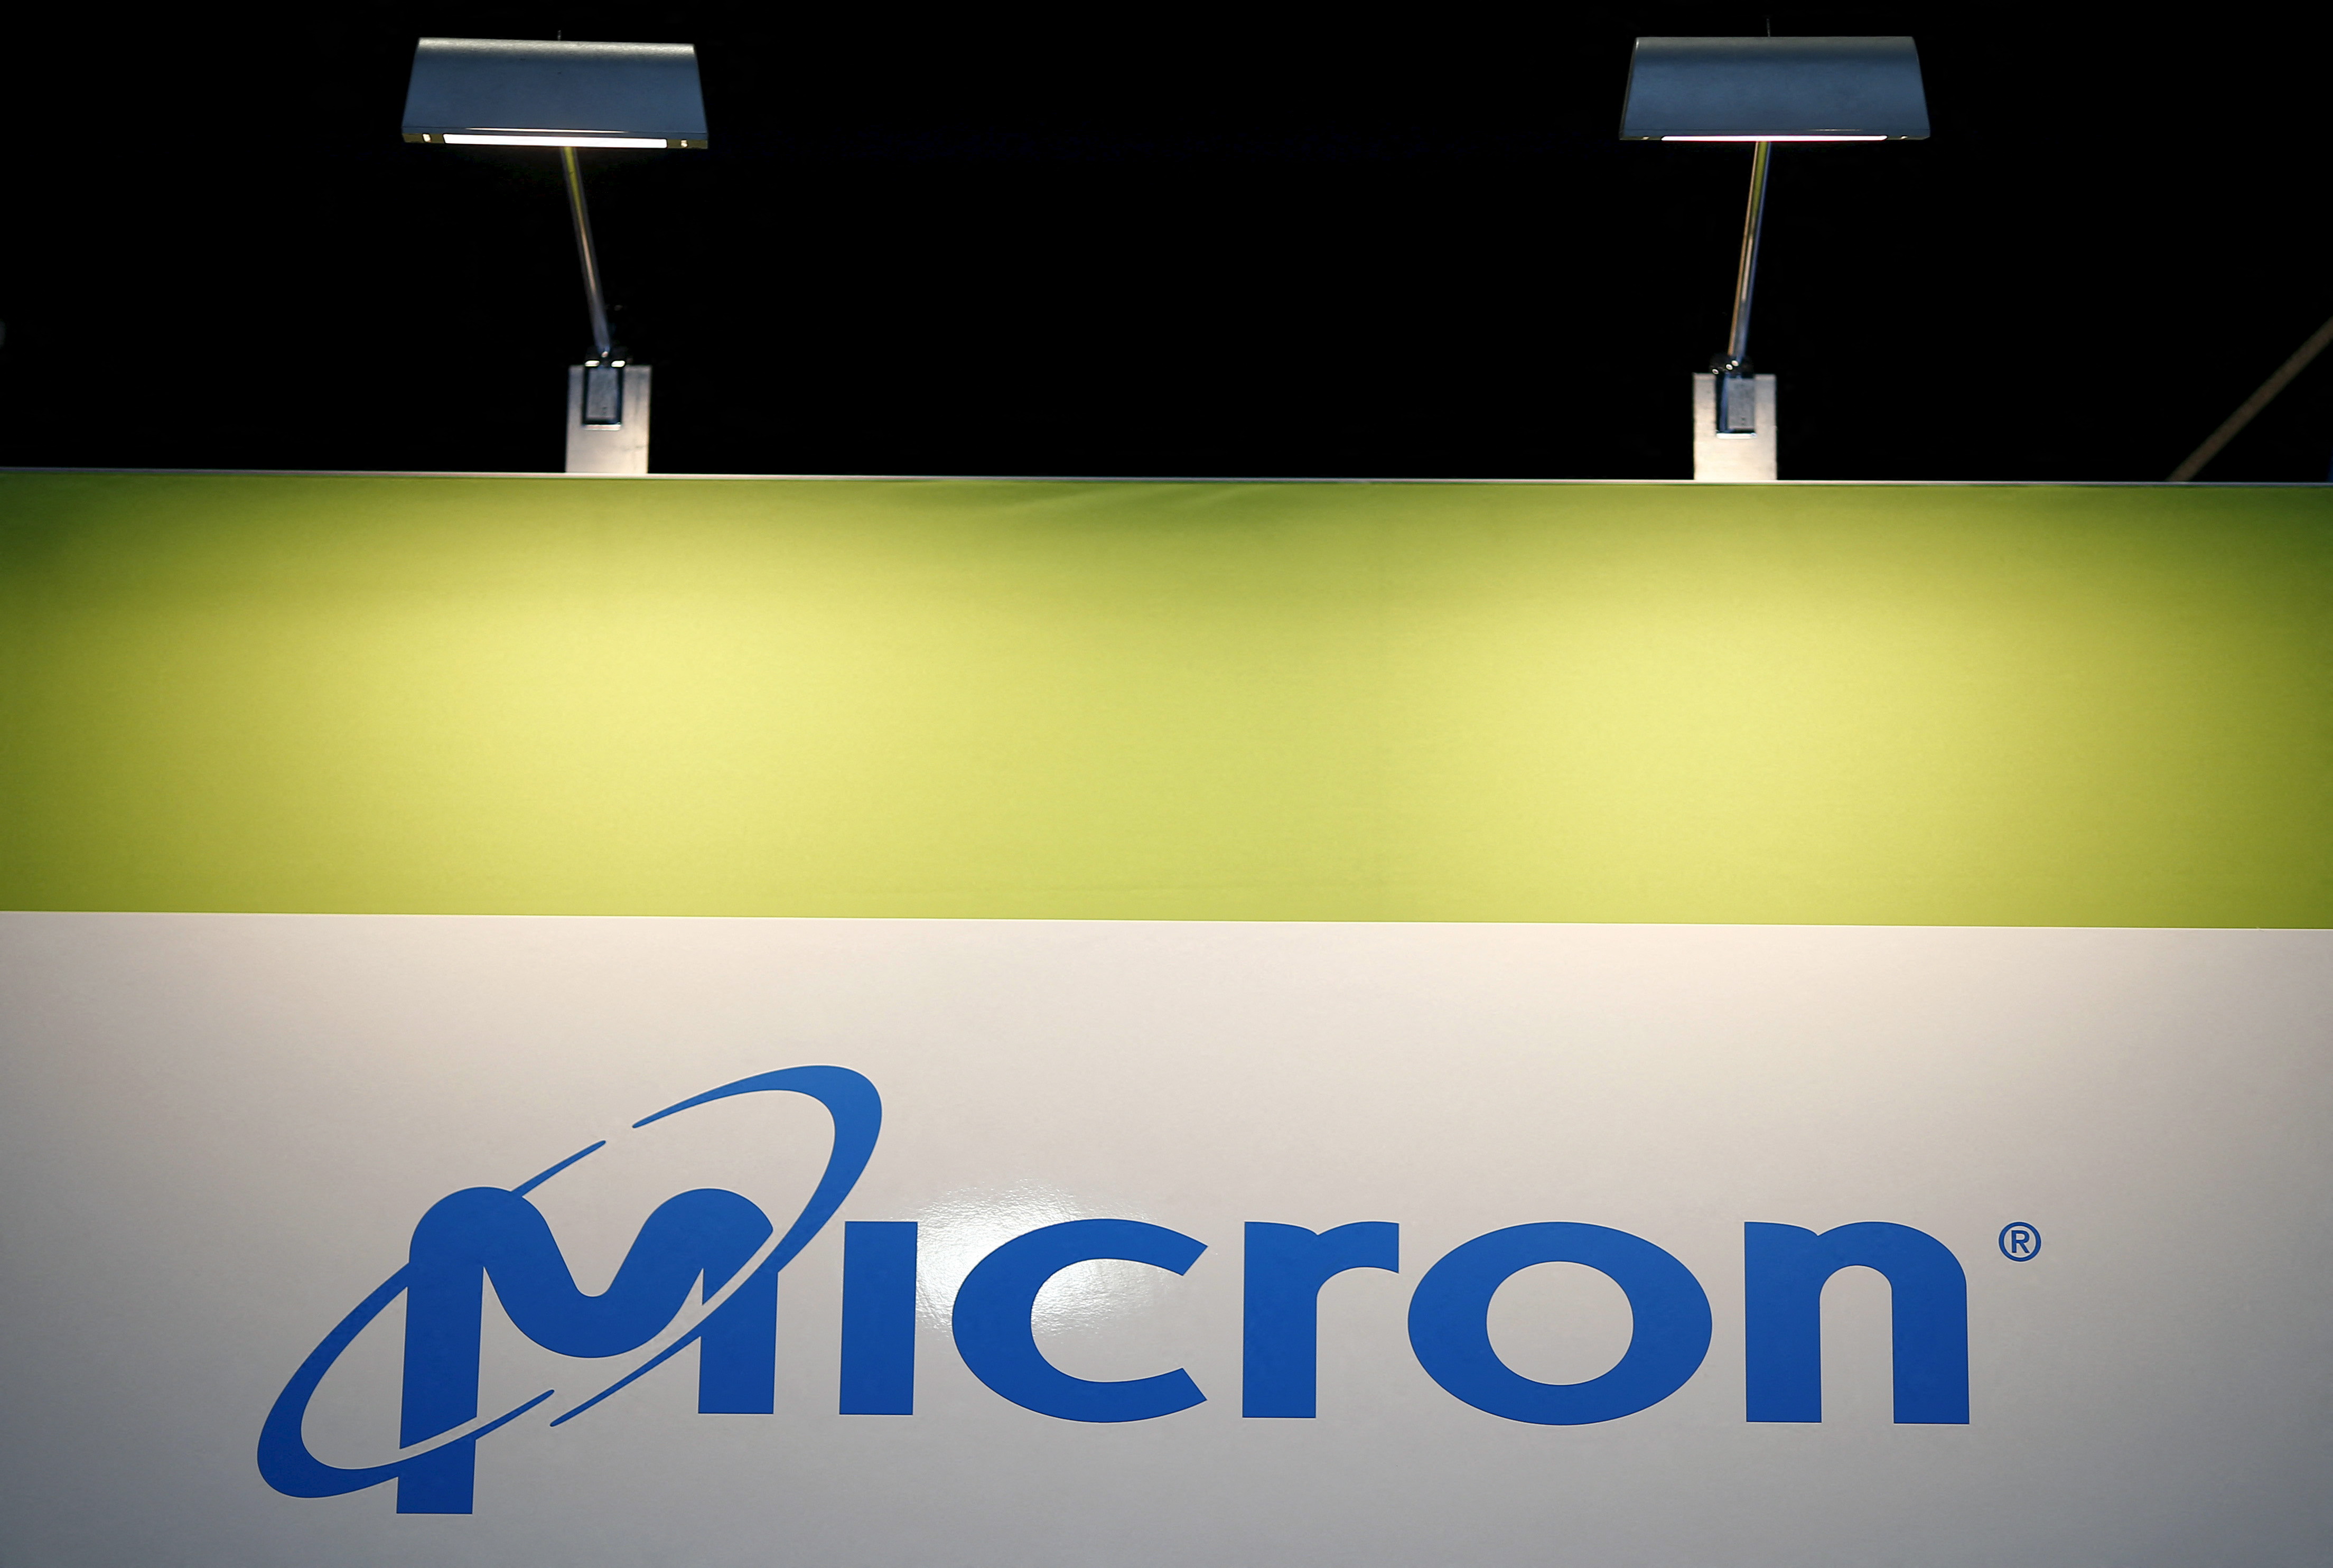 MICRON TO BUILD $15 BILLION MANUFACTURING FACILITY IN BOISE